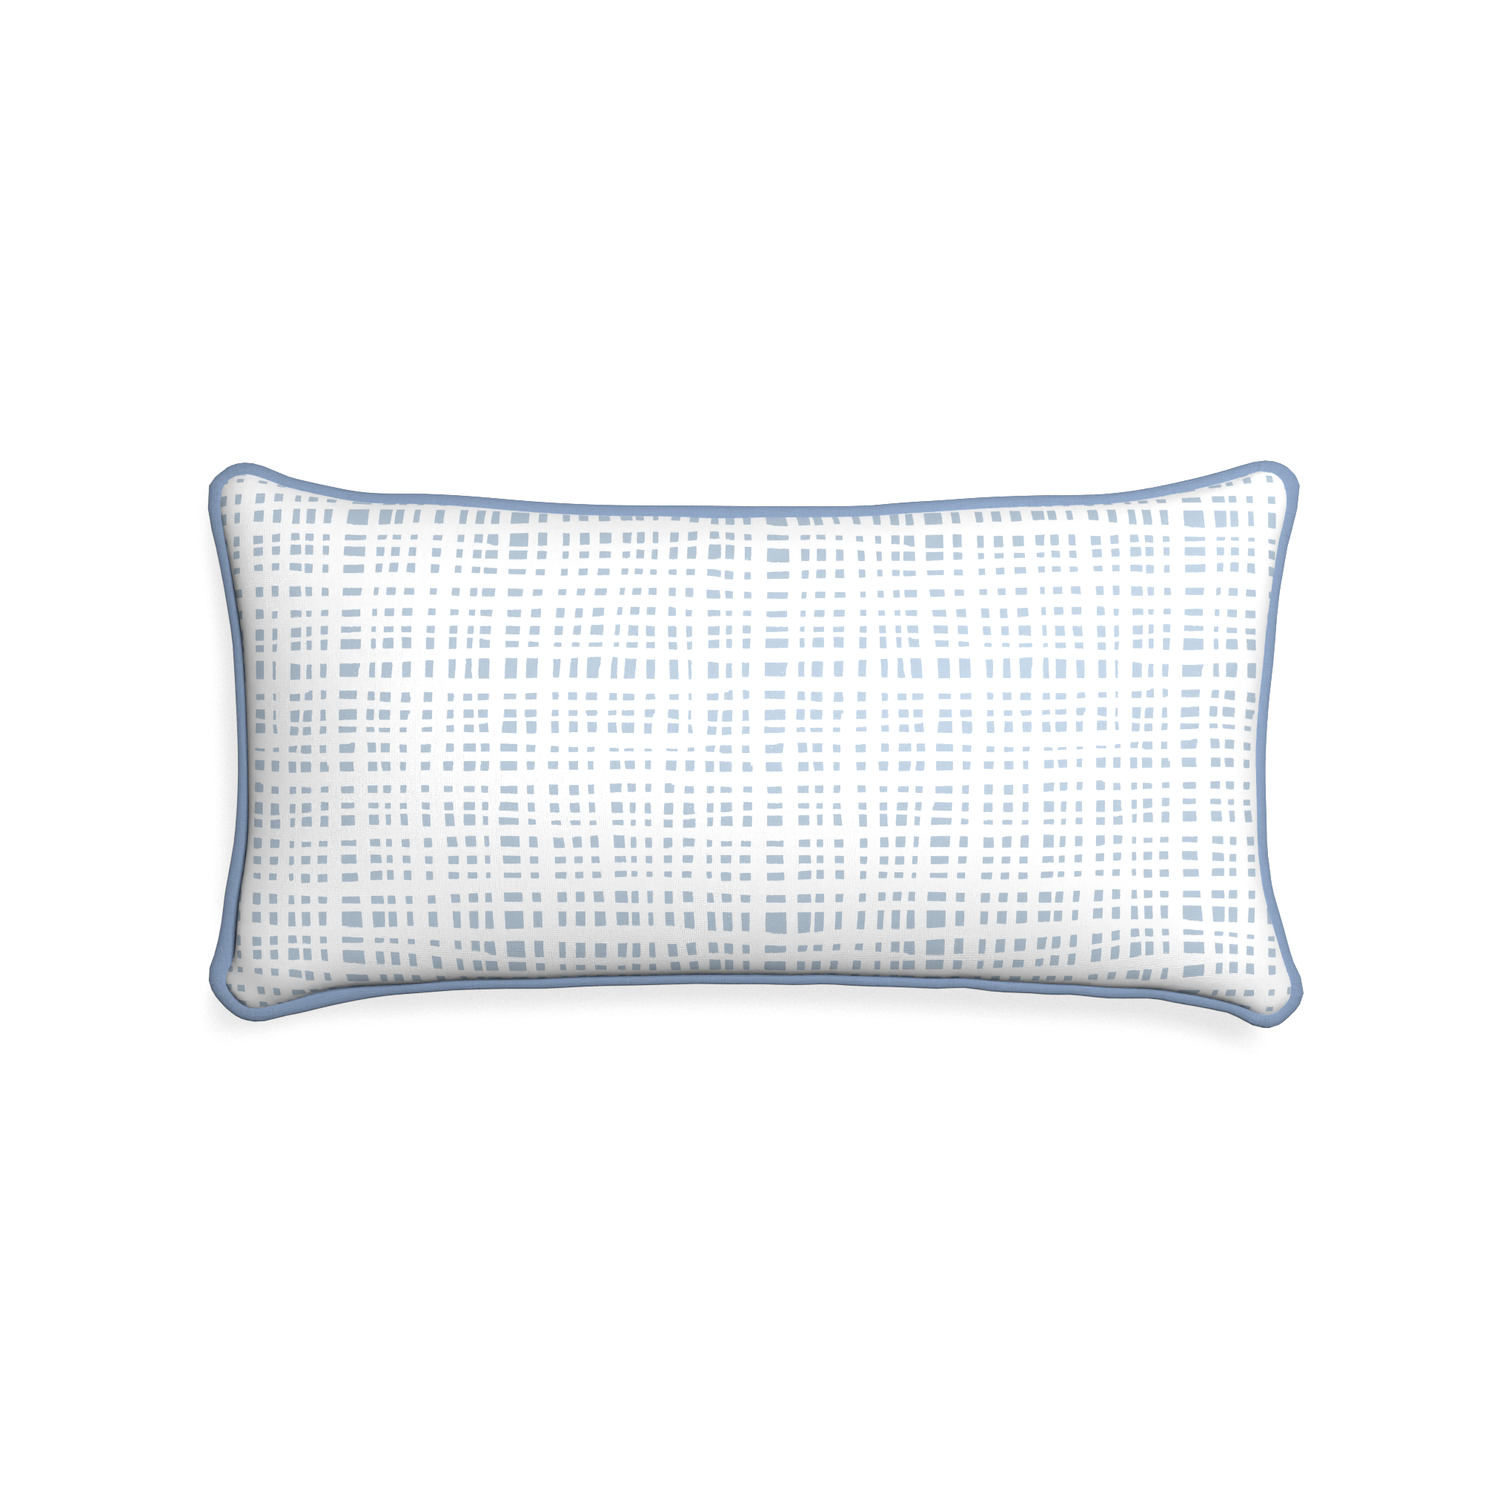 Midi-lumbar ginger custom plaid sky bluepillow with sky piping on white background